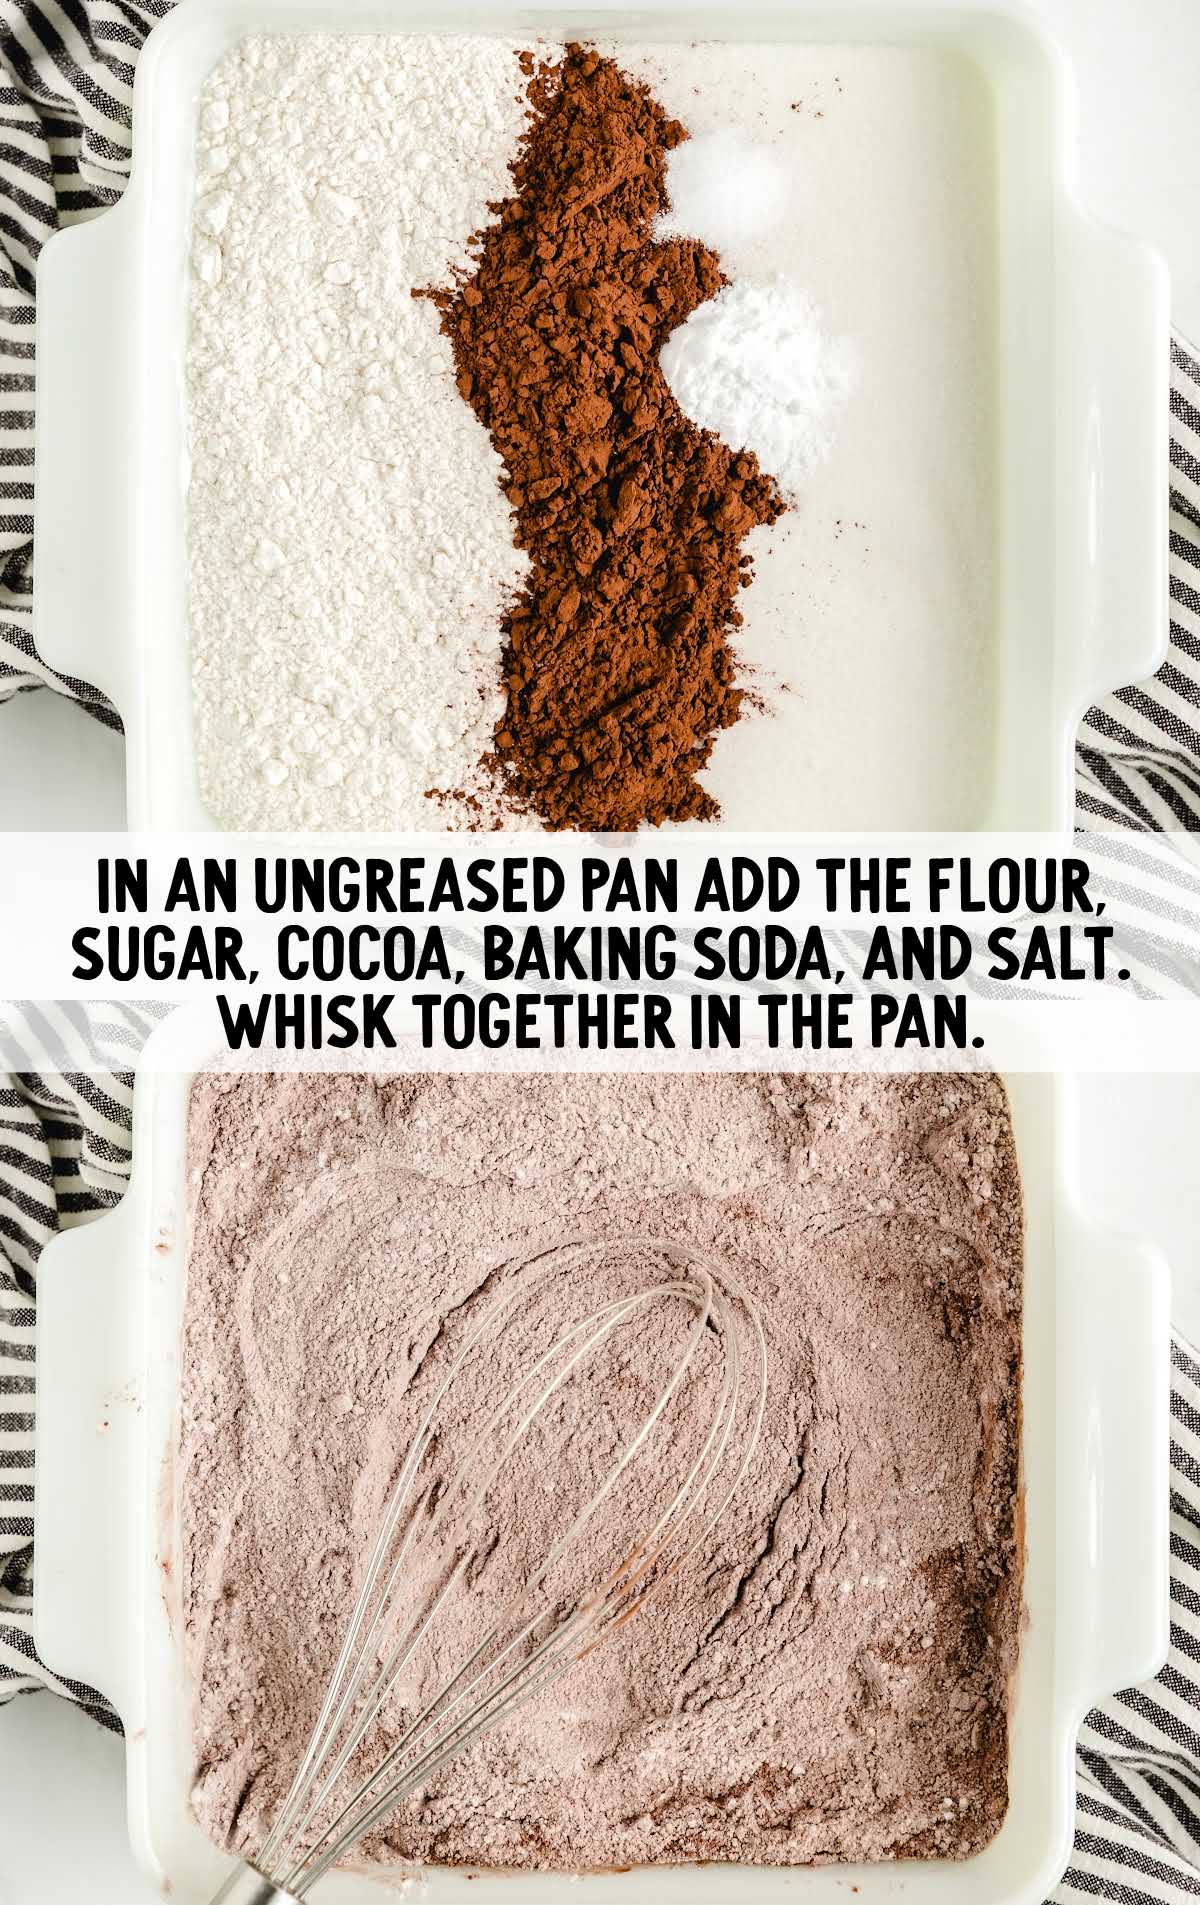 flour, sugar, cocoa, baking soda, and salt whisked together